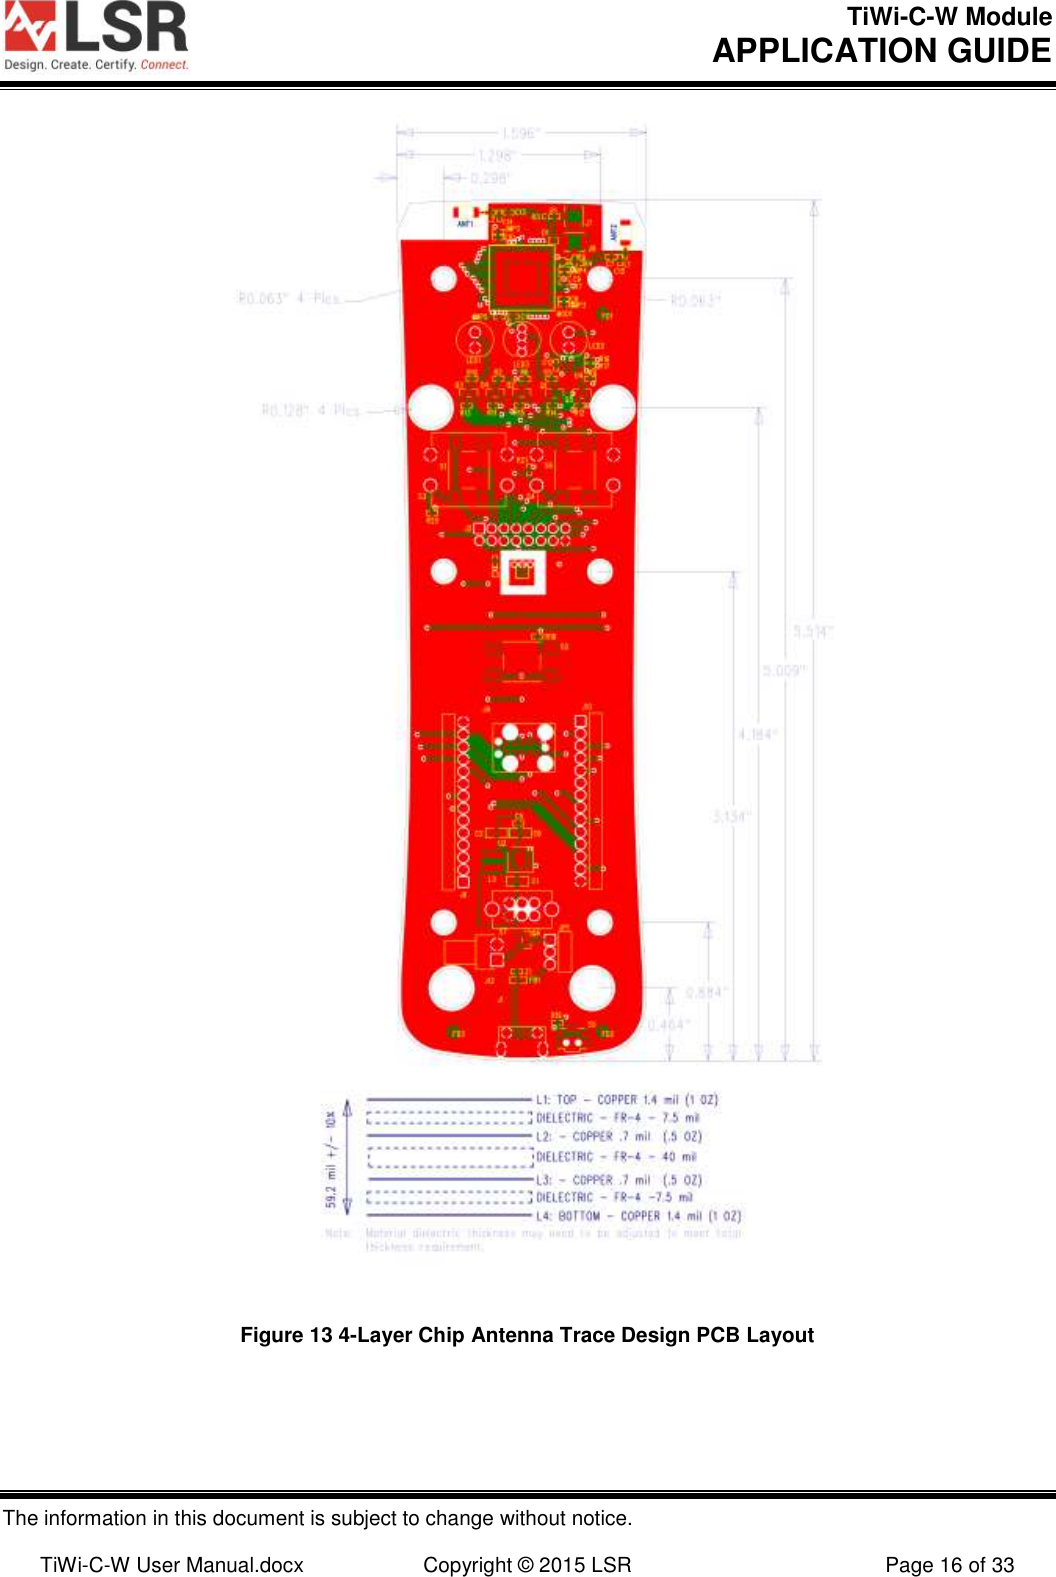 TiWi-C-W Module       APPLICATION GUIDE  The information in this document is subject to change without notice.  TiWi-C-W User Manual.docx  Copyright © 2015 LSR  Page 16 of 33           Figure 13 4-Layer Chip Antenna Trace Design PCB Layout 